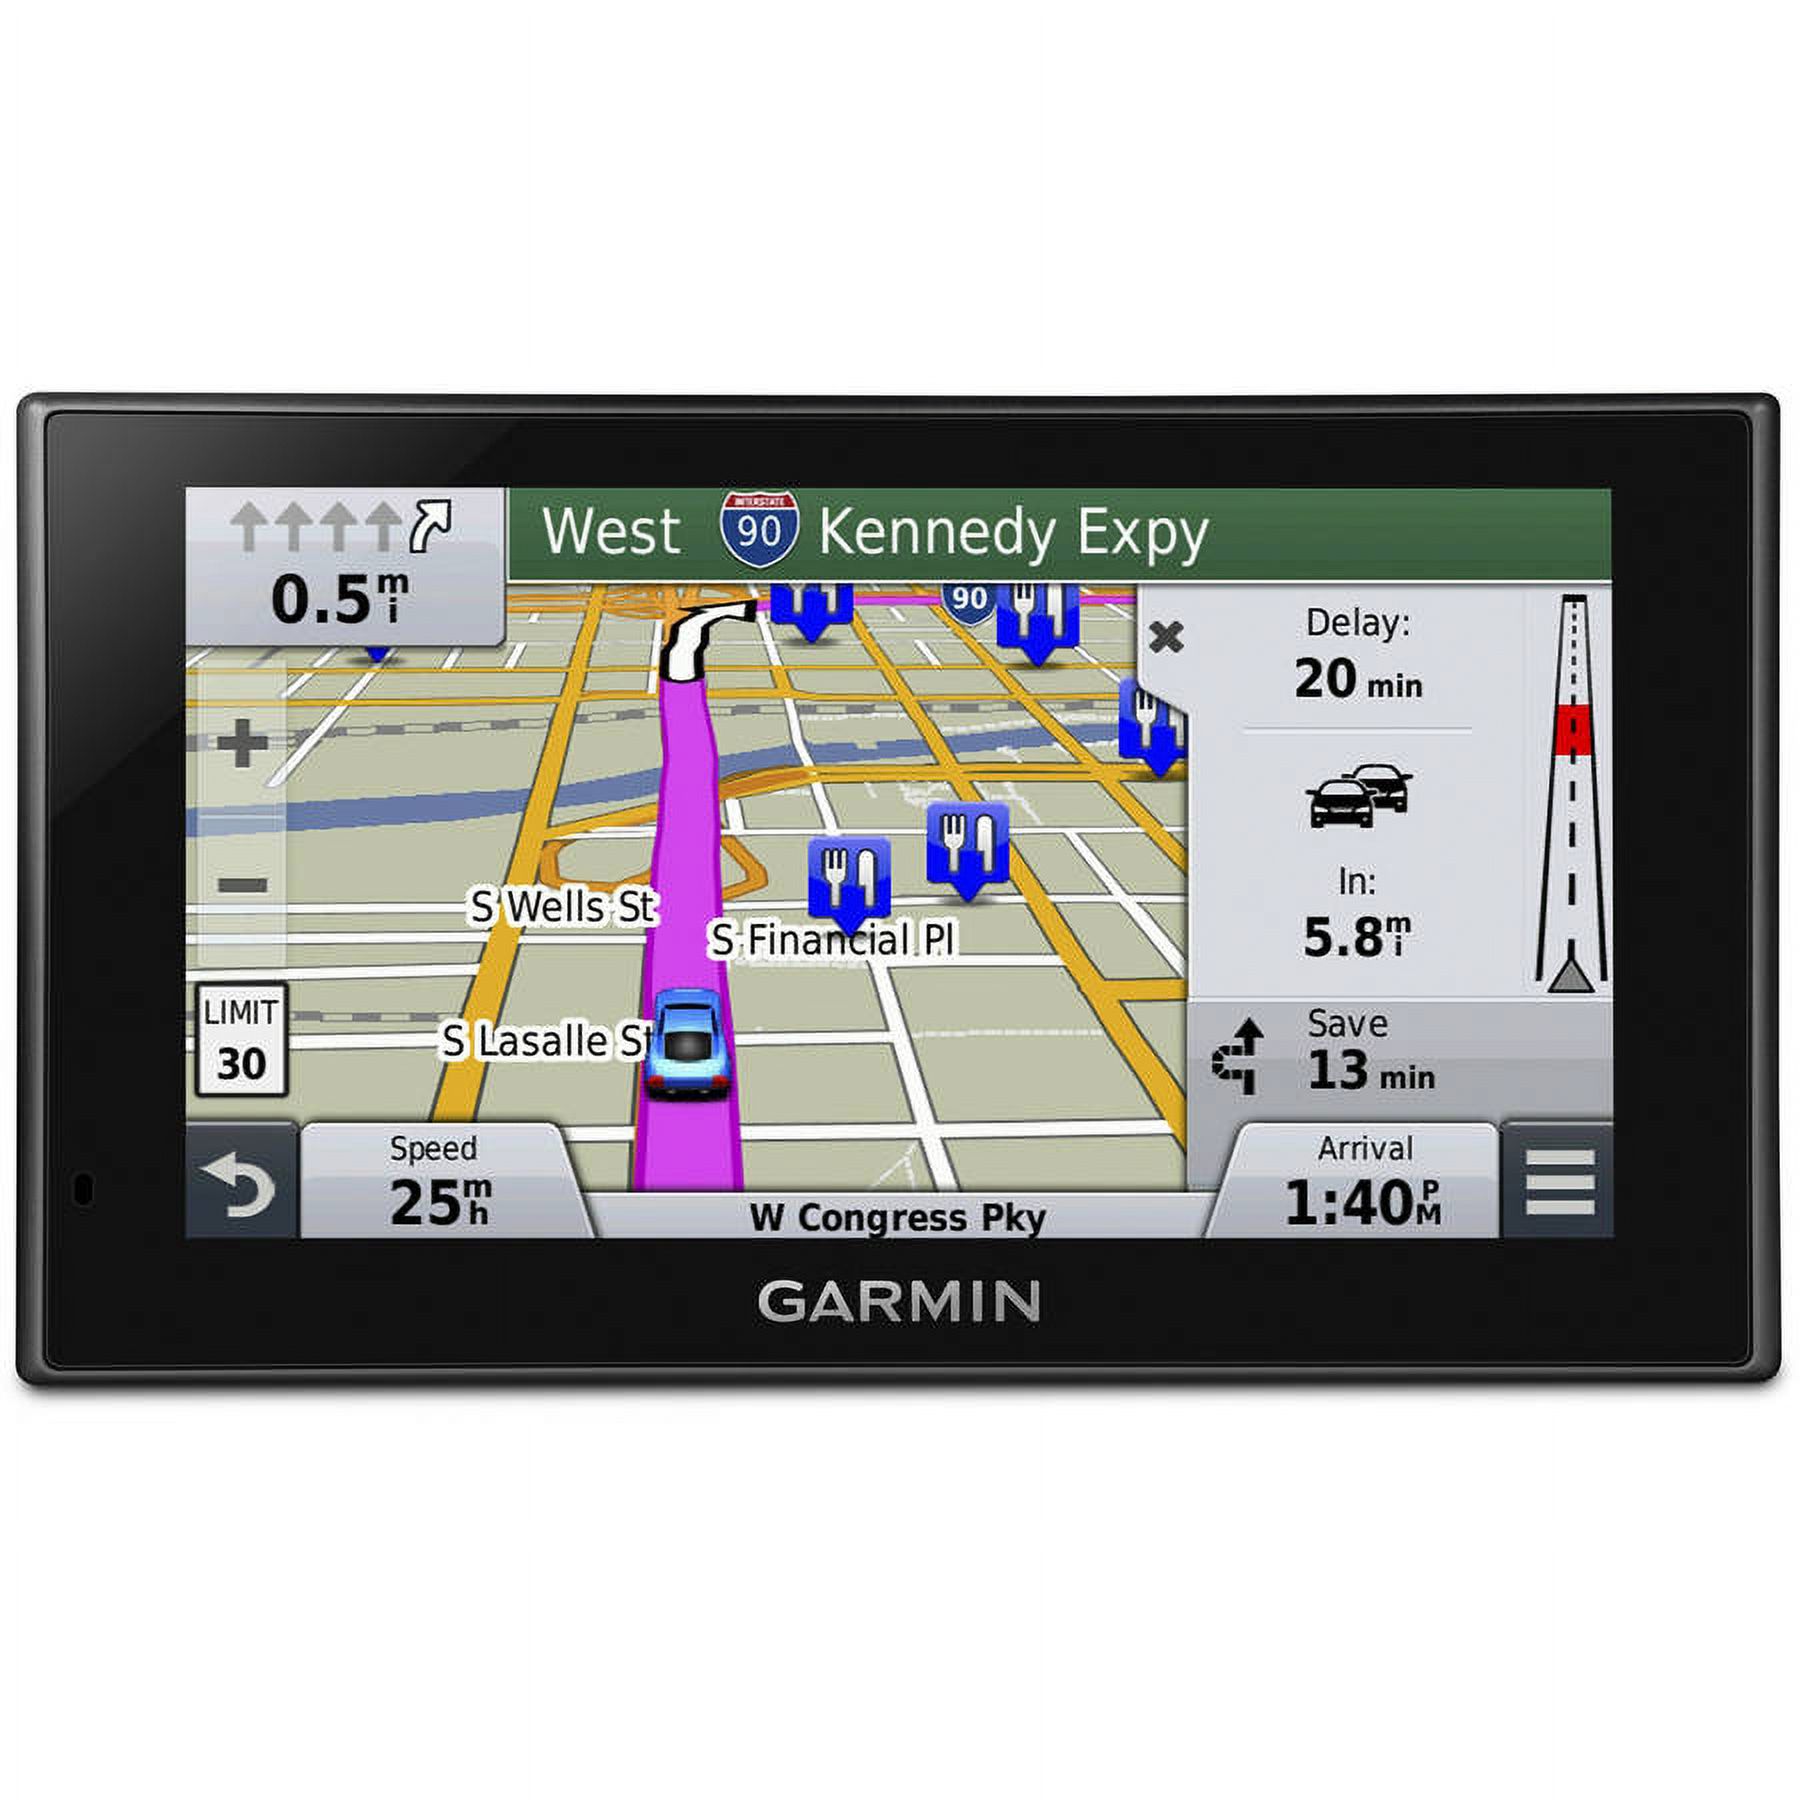 Garmin nuvi 2699LMT HD 6" GPS with Lifetime Maps and HD Traffic (010-01188-00) - image 2 of 5